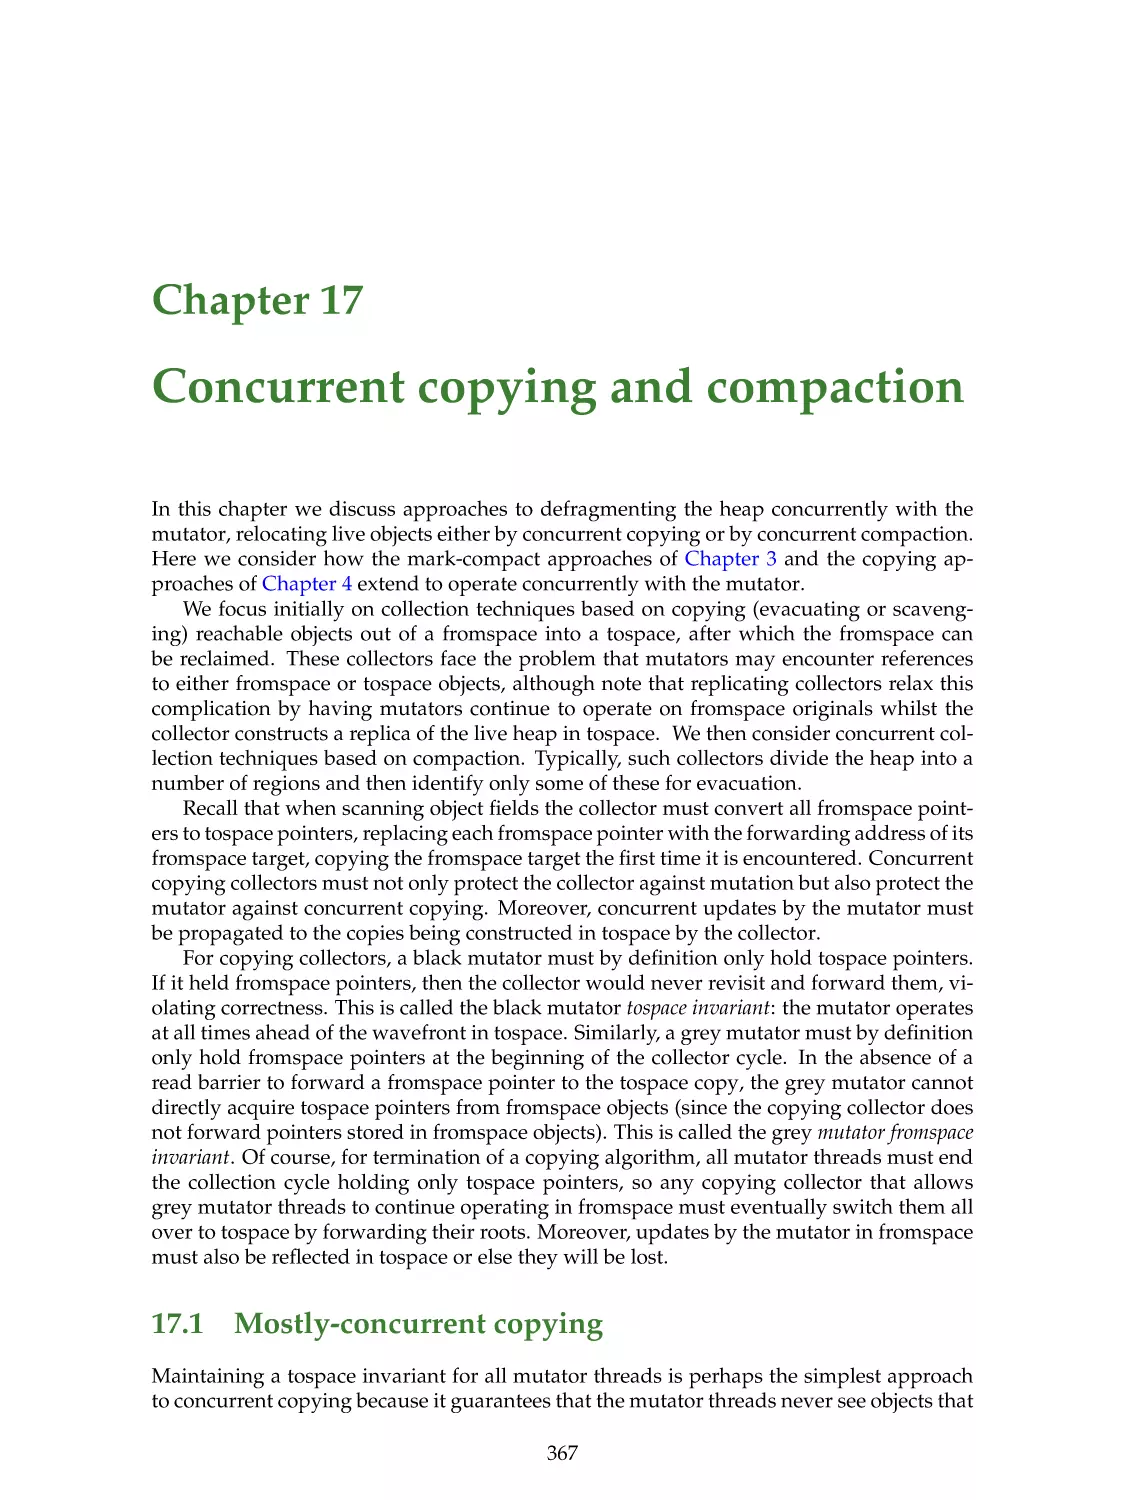 17. Concurrent copying and compaction
17.1. Mostly-concurrent copying